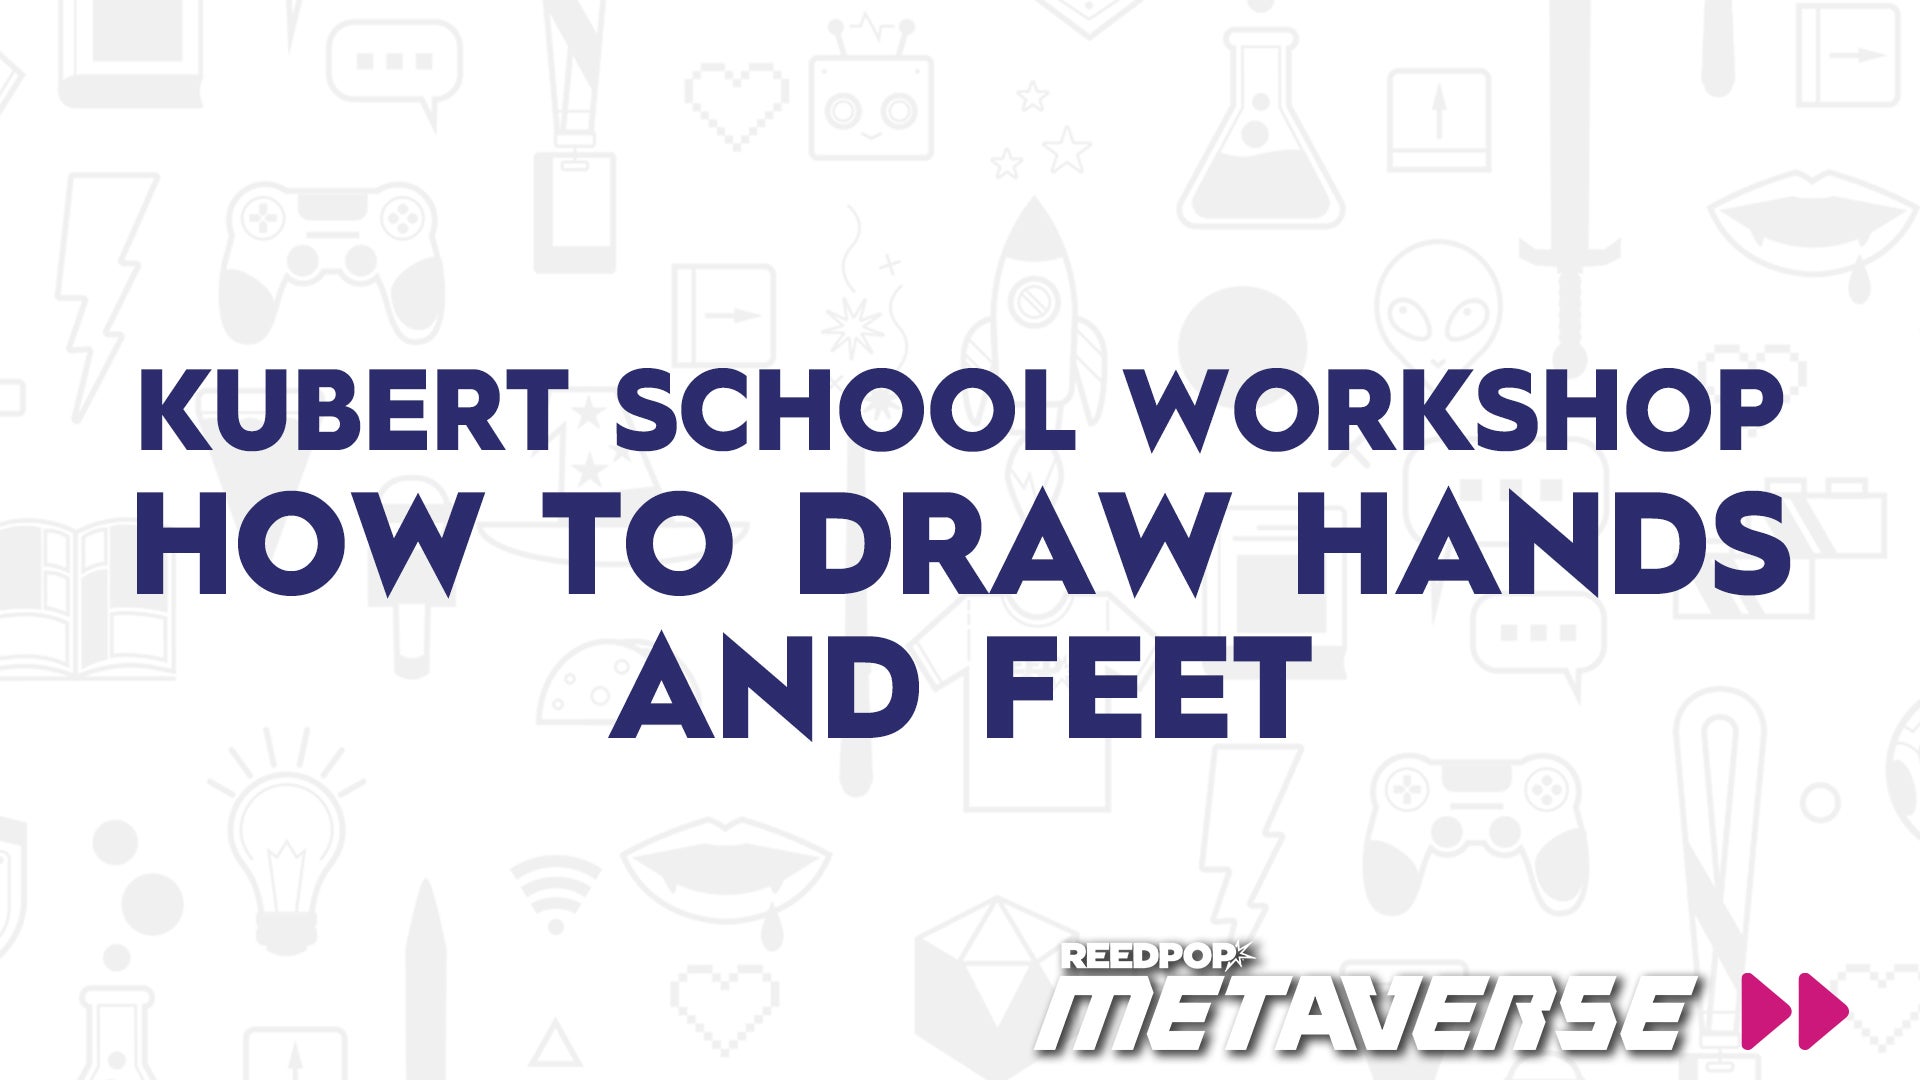 Image for Kubert School Workshop - How to Draw Hands and Feet